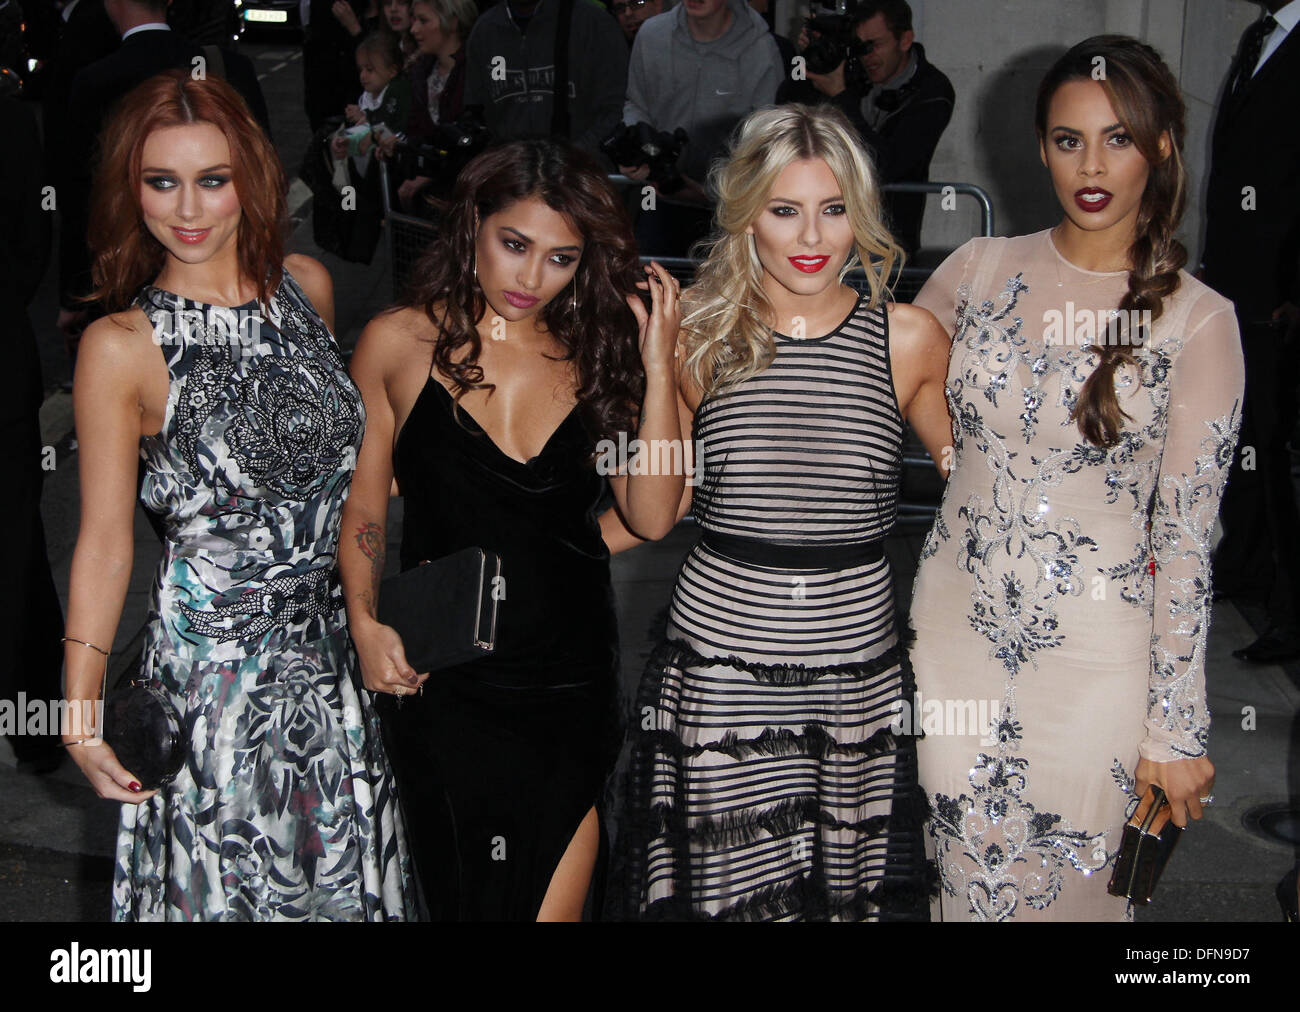 London, UK, 7th October 20113. (L-R) Una Healy, Vanessa White, Mollie King and Rochelle Humes of the Saturdays girl band attend the Pride of Britain awards at Grosvenor House in London Credit:  WFPA/Alamy Live News Stock Photo